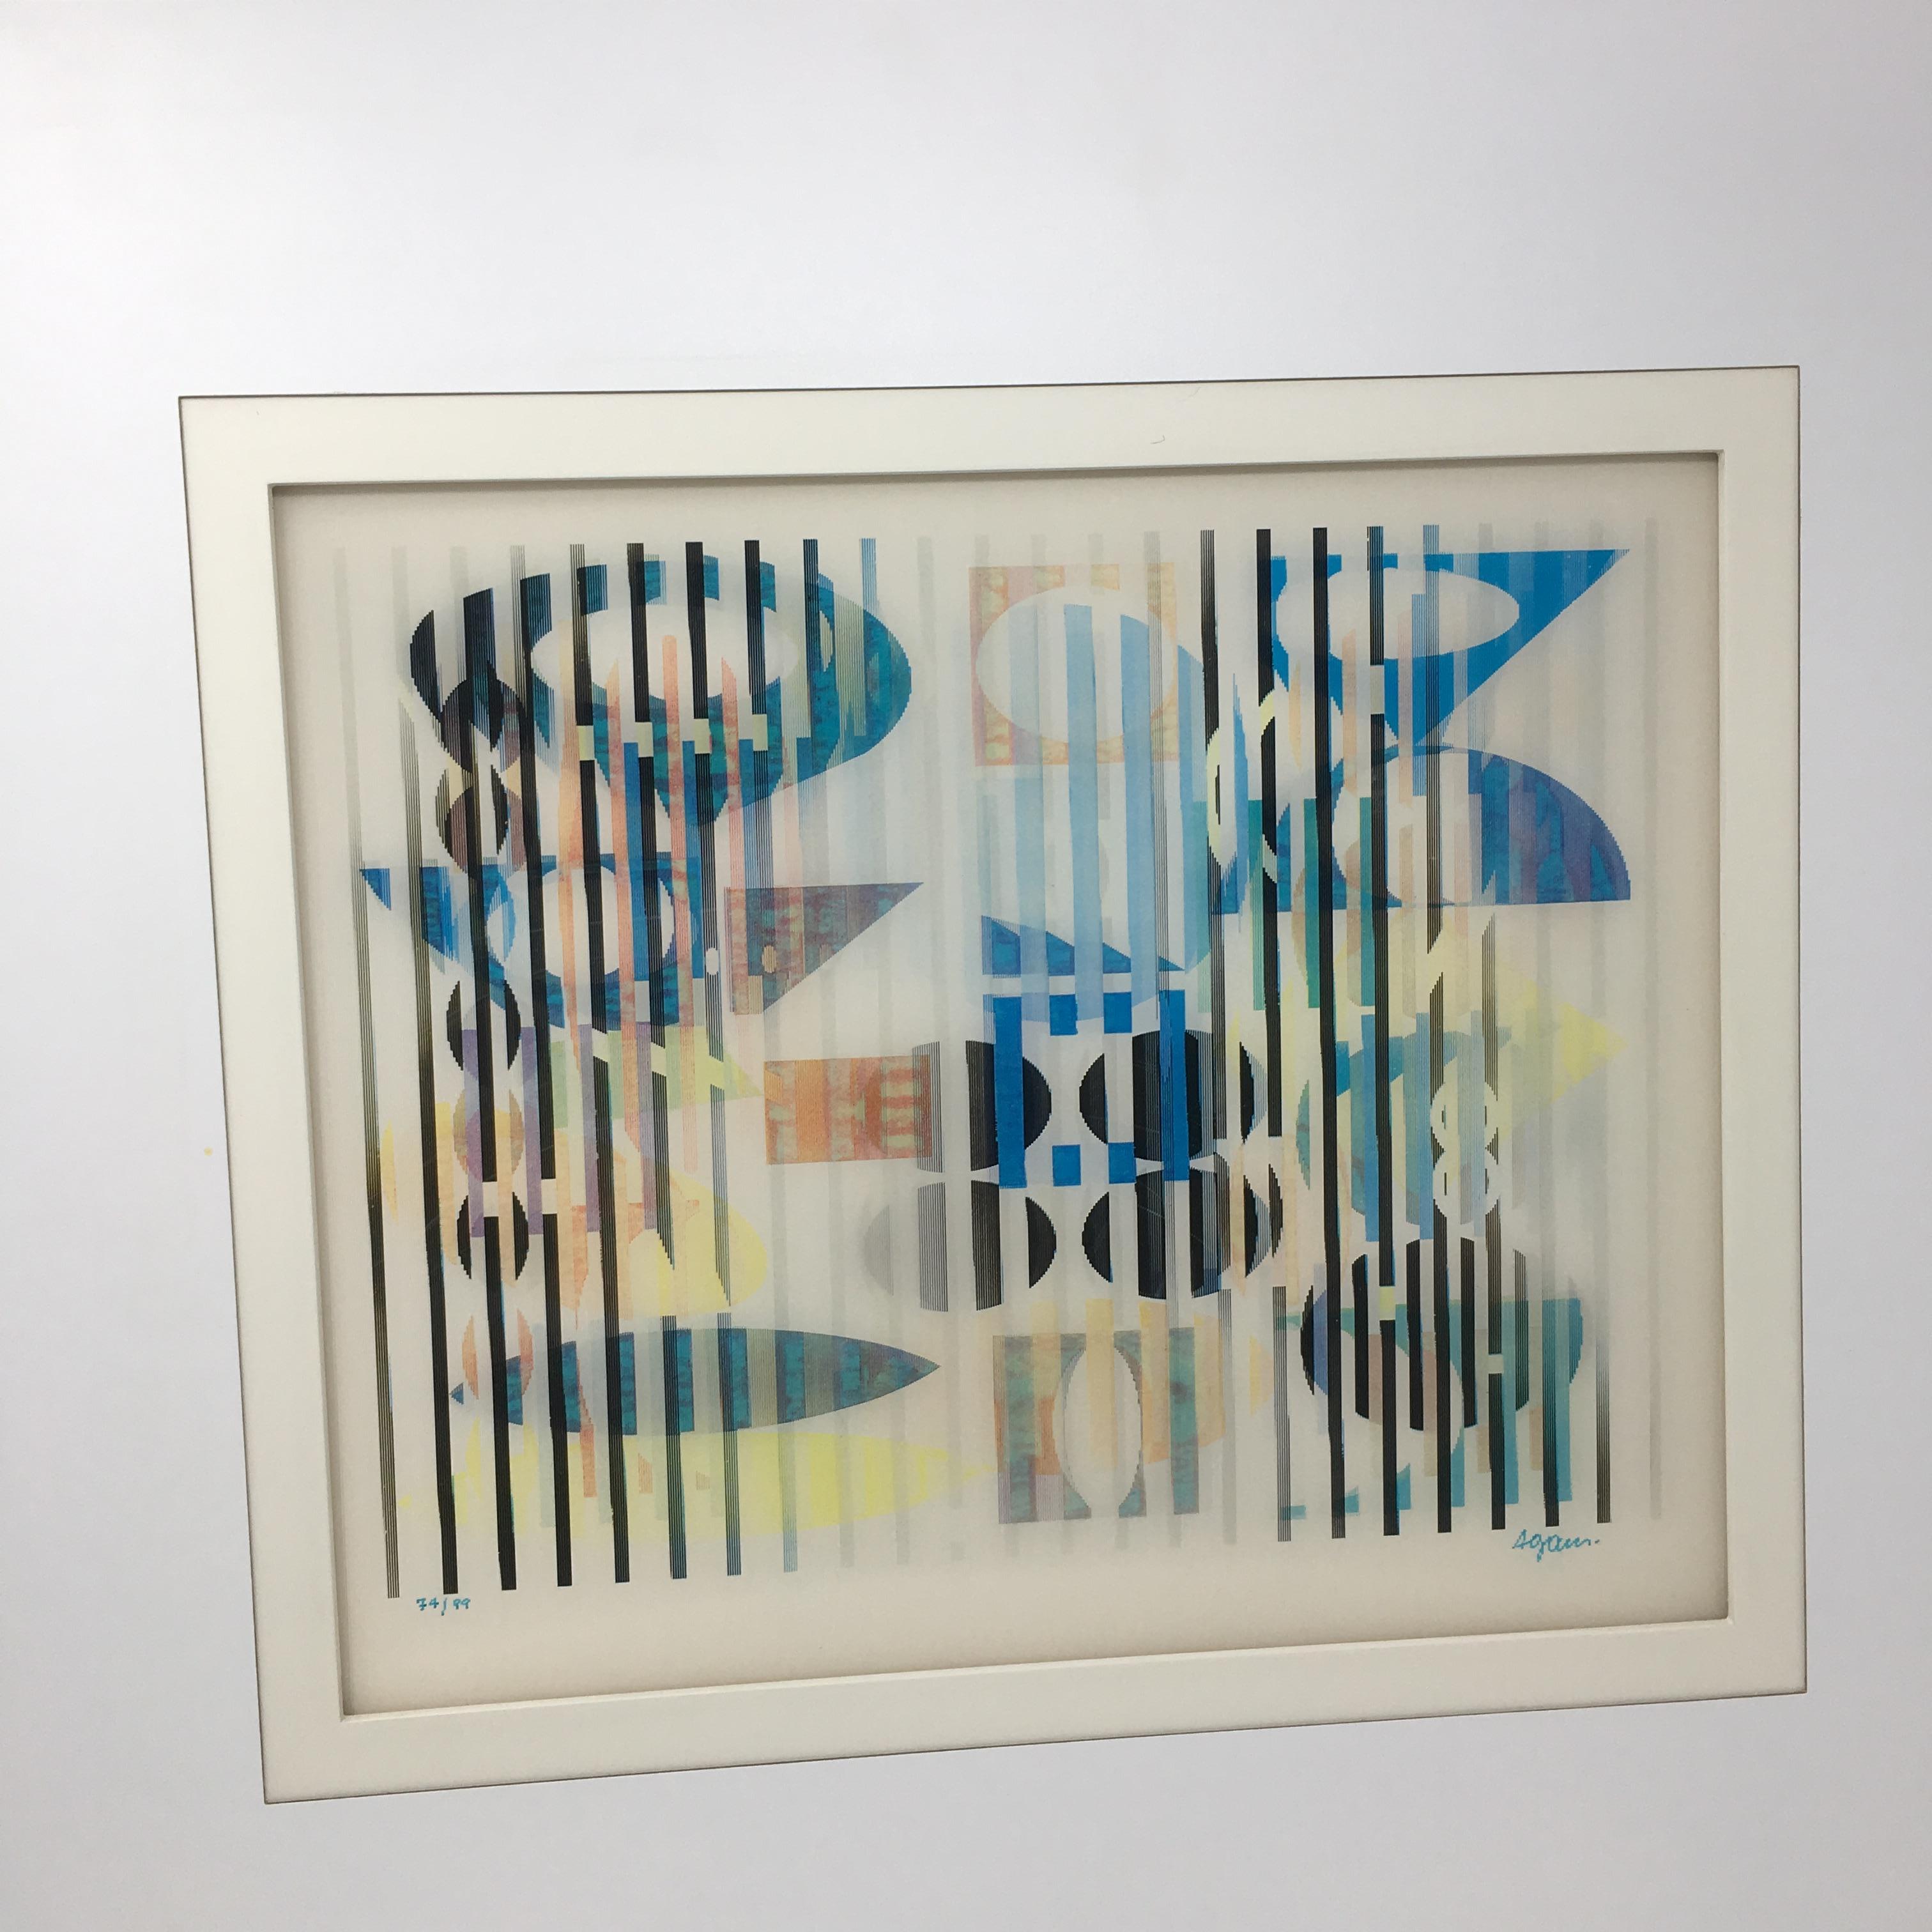 Agam 'Petite Secret' signed limited edition Agamograph kinetic op-art print - Gray Abstract Print by Yaacov Agam